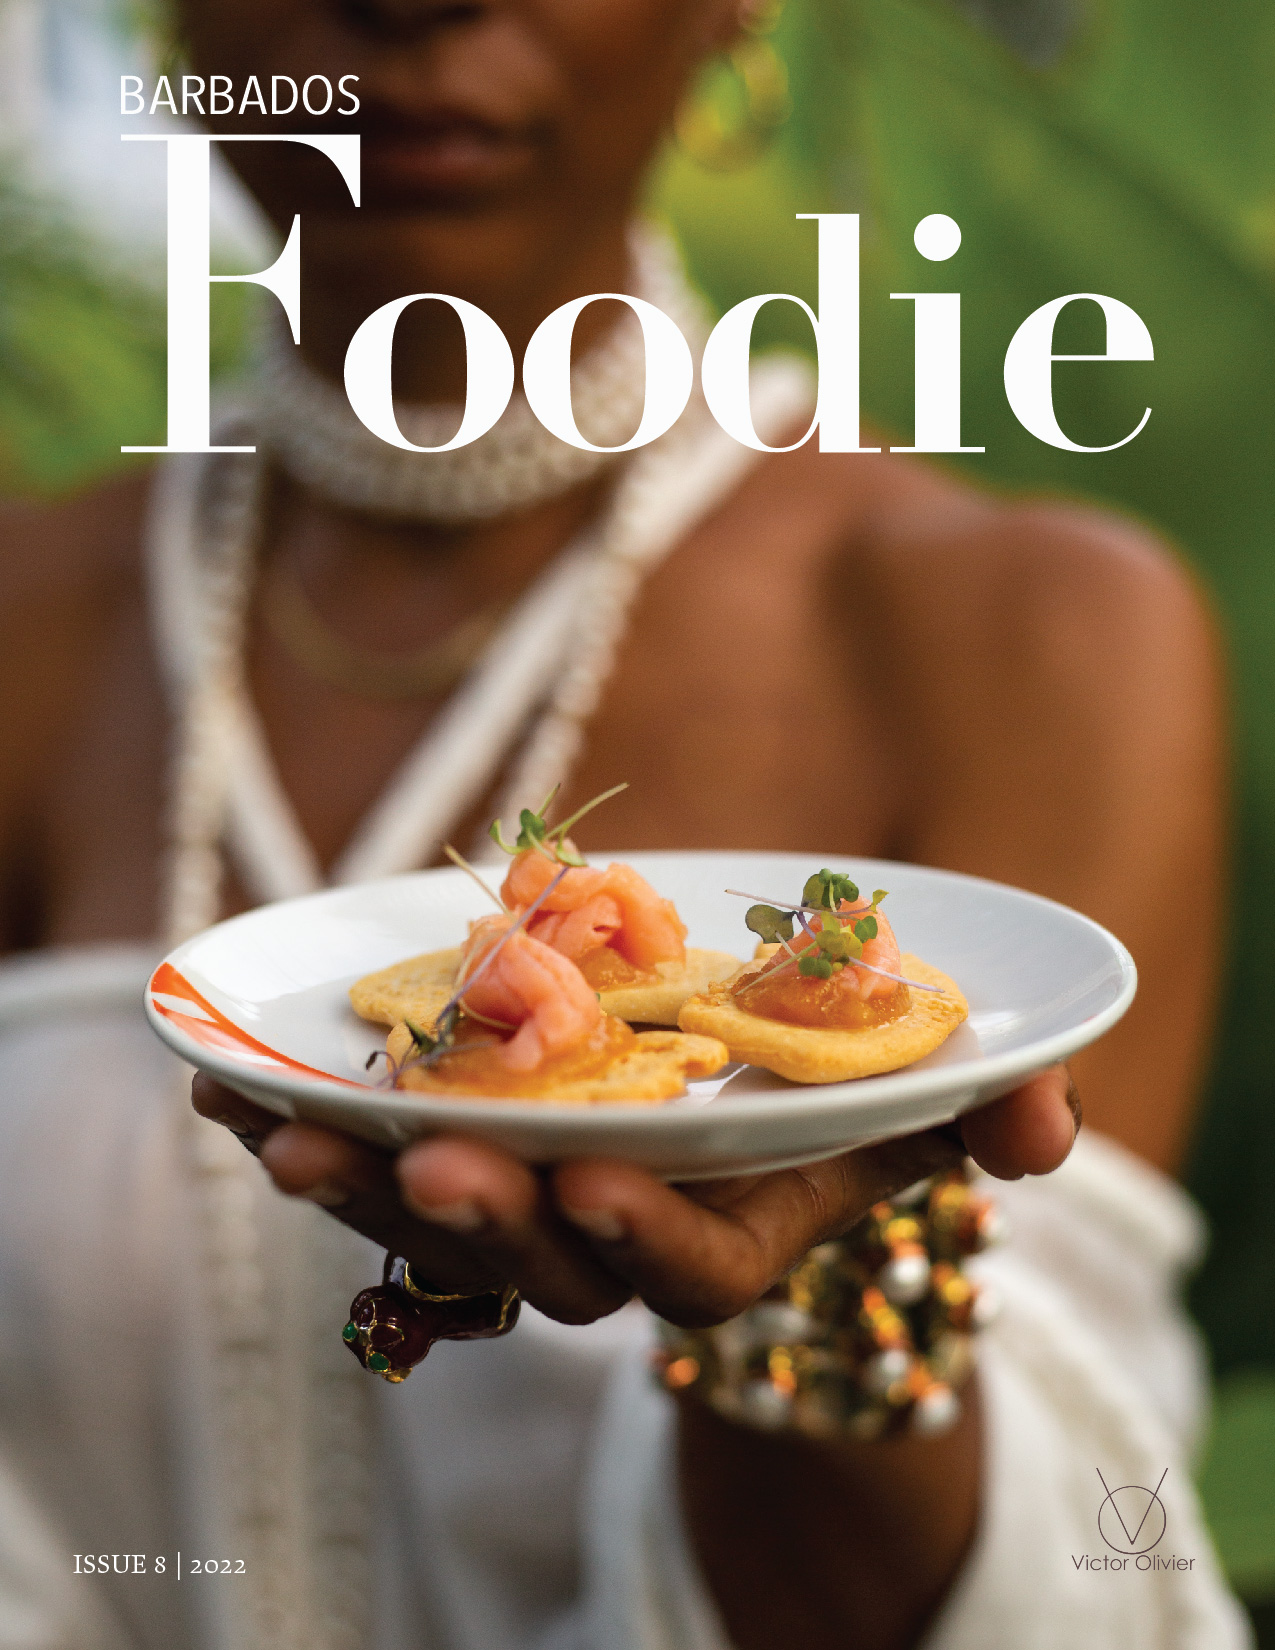 Barbados Foodie, Issue 8, 2022